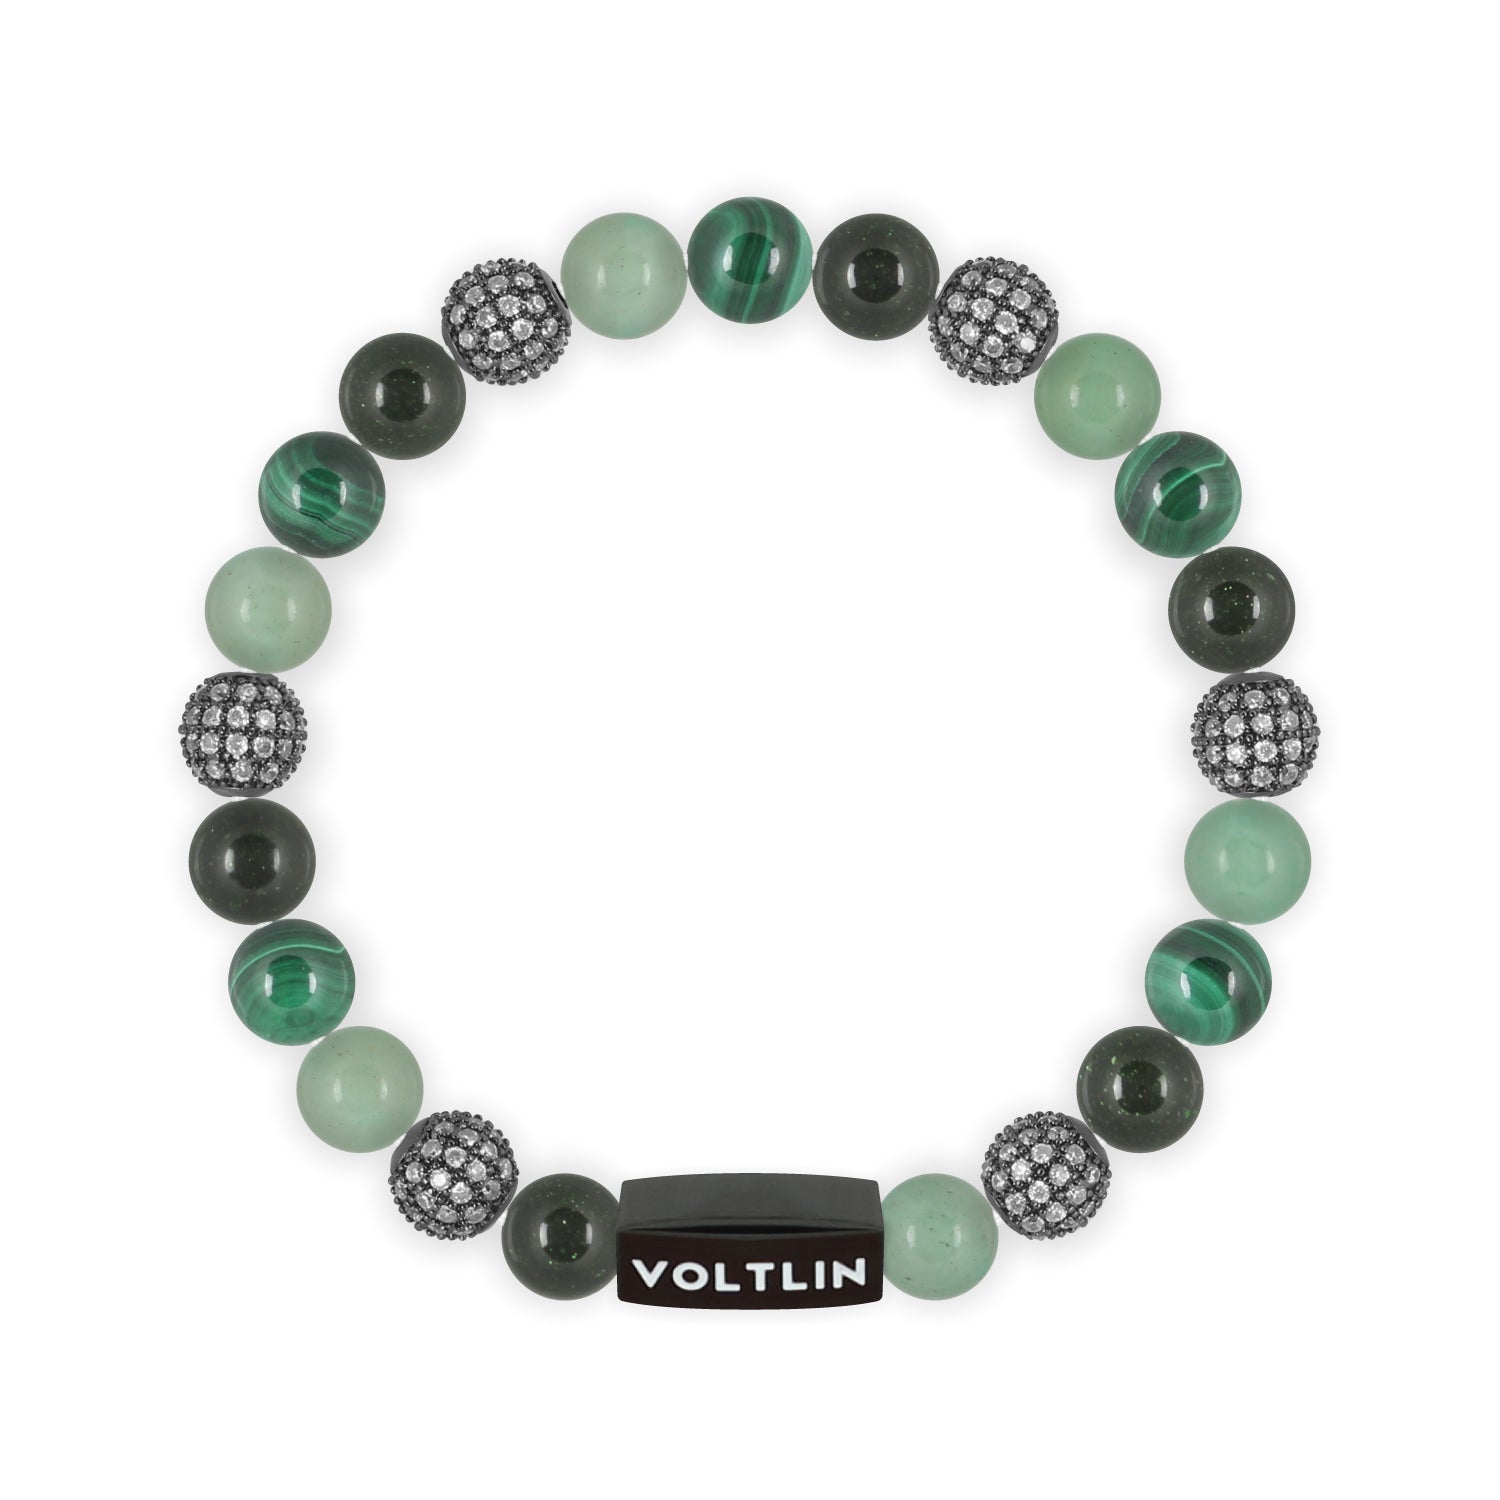 Front view of an 8mm Green Sirius beaded stretch bracelet featuring Green Goldstone, Steel Pave, Green Aventurine, & Malachite crystal and black stainless steel logo bead made by Voltlin